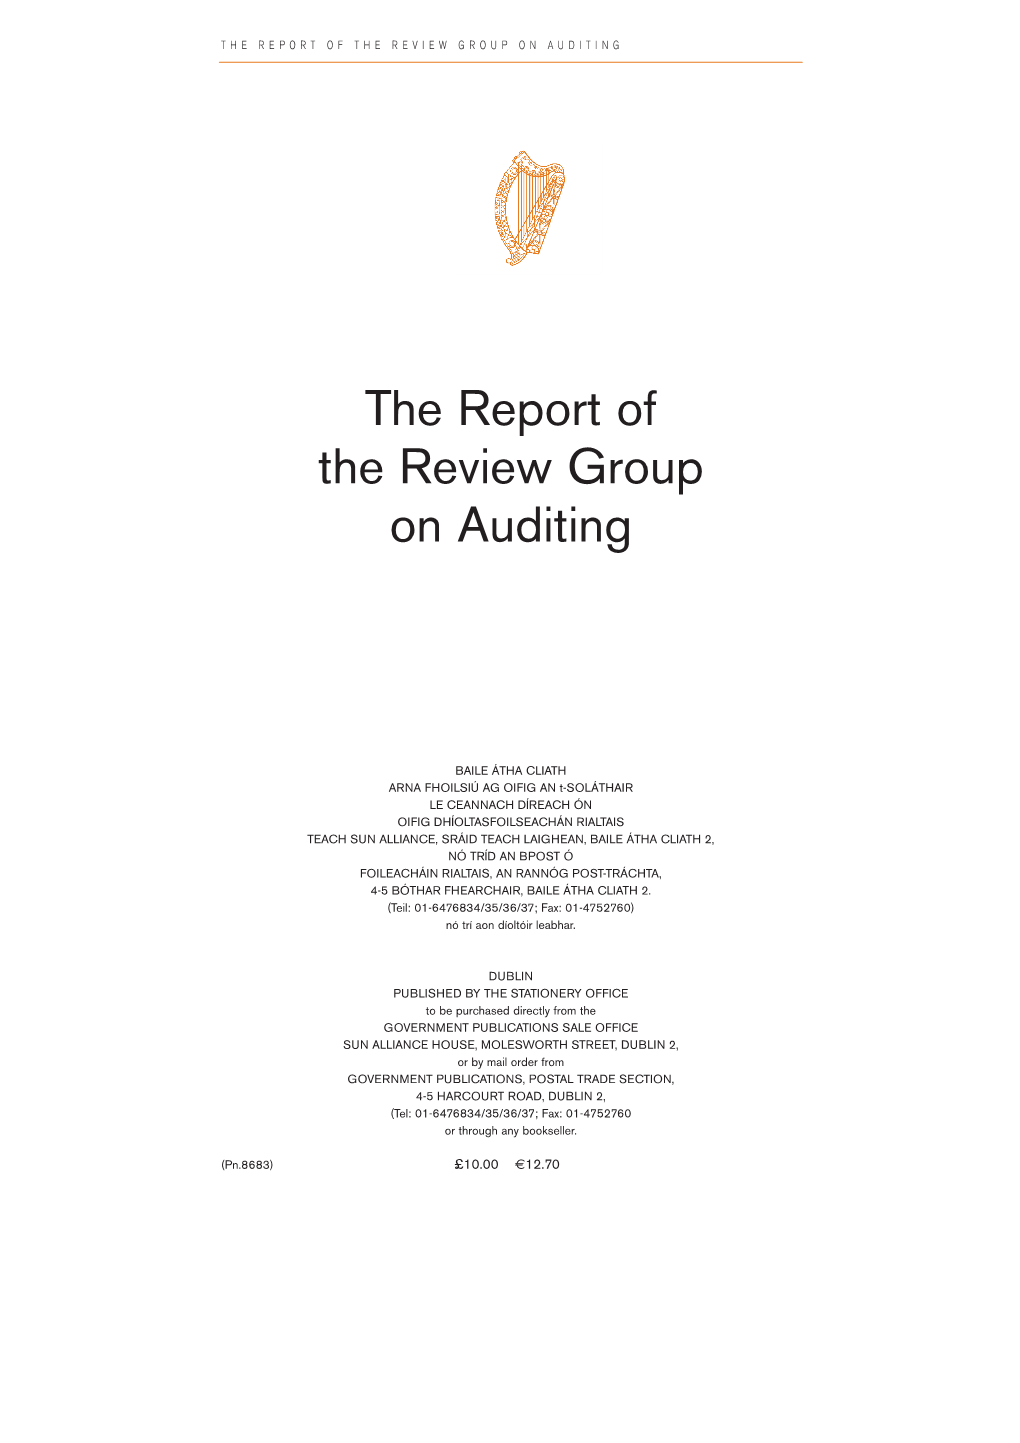 Report of the Review Group on Auditing